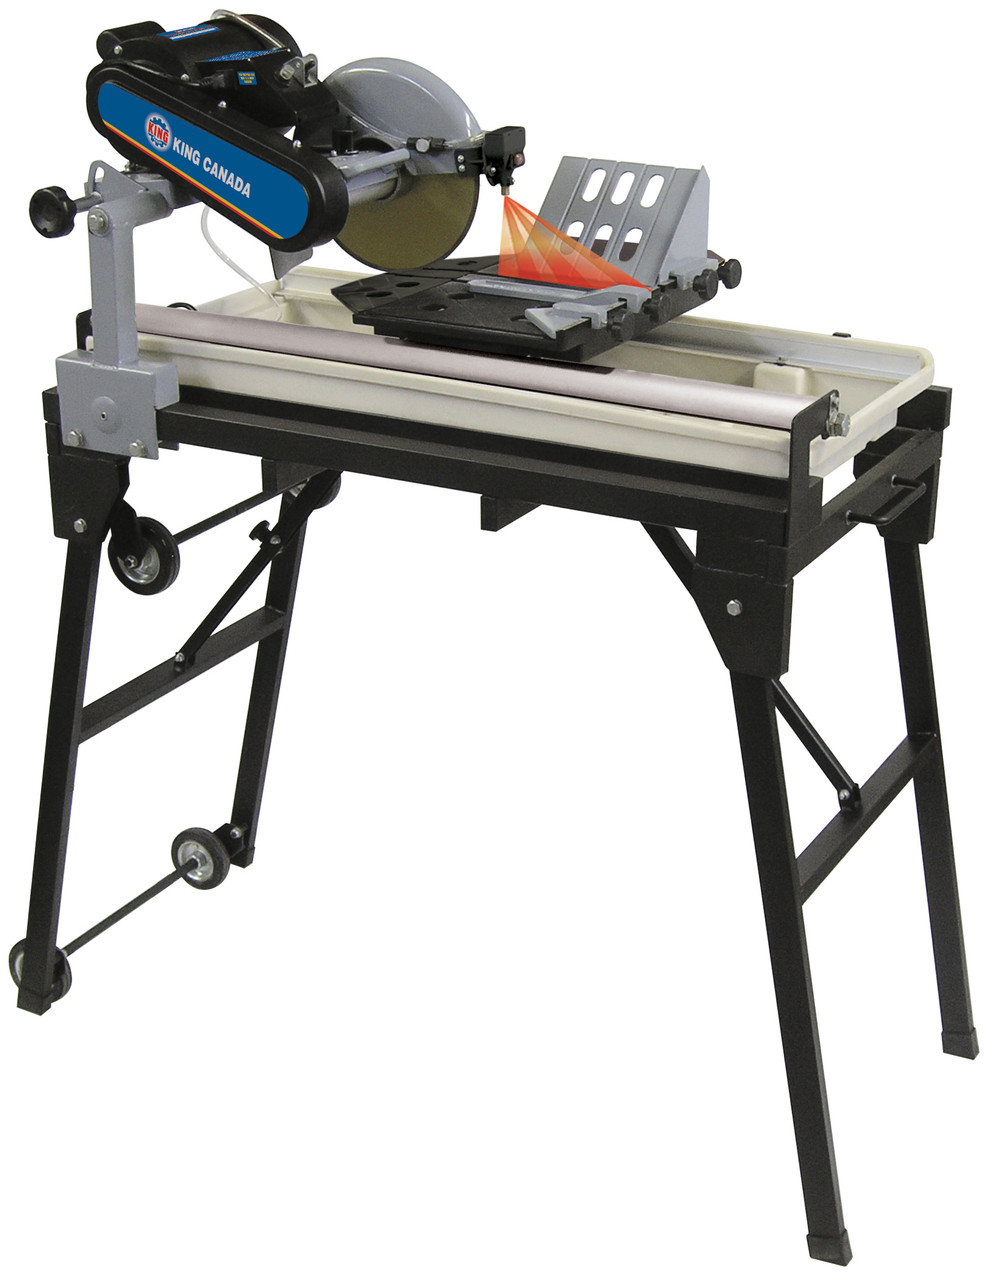 King Canada KC-3010NB - 10'' Sliding tile saw with laser guide -  Canucktools.ca